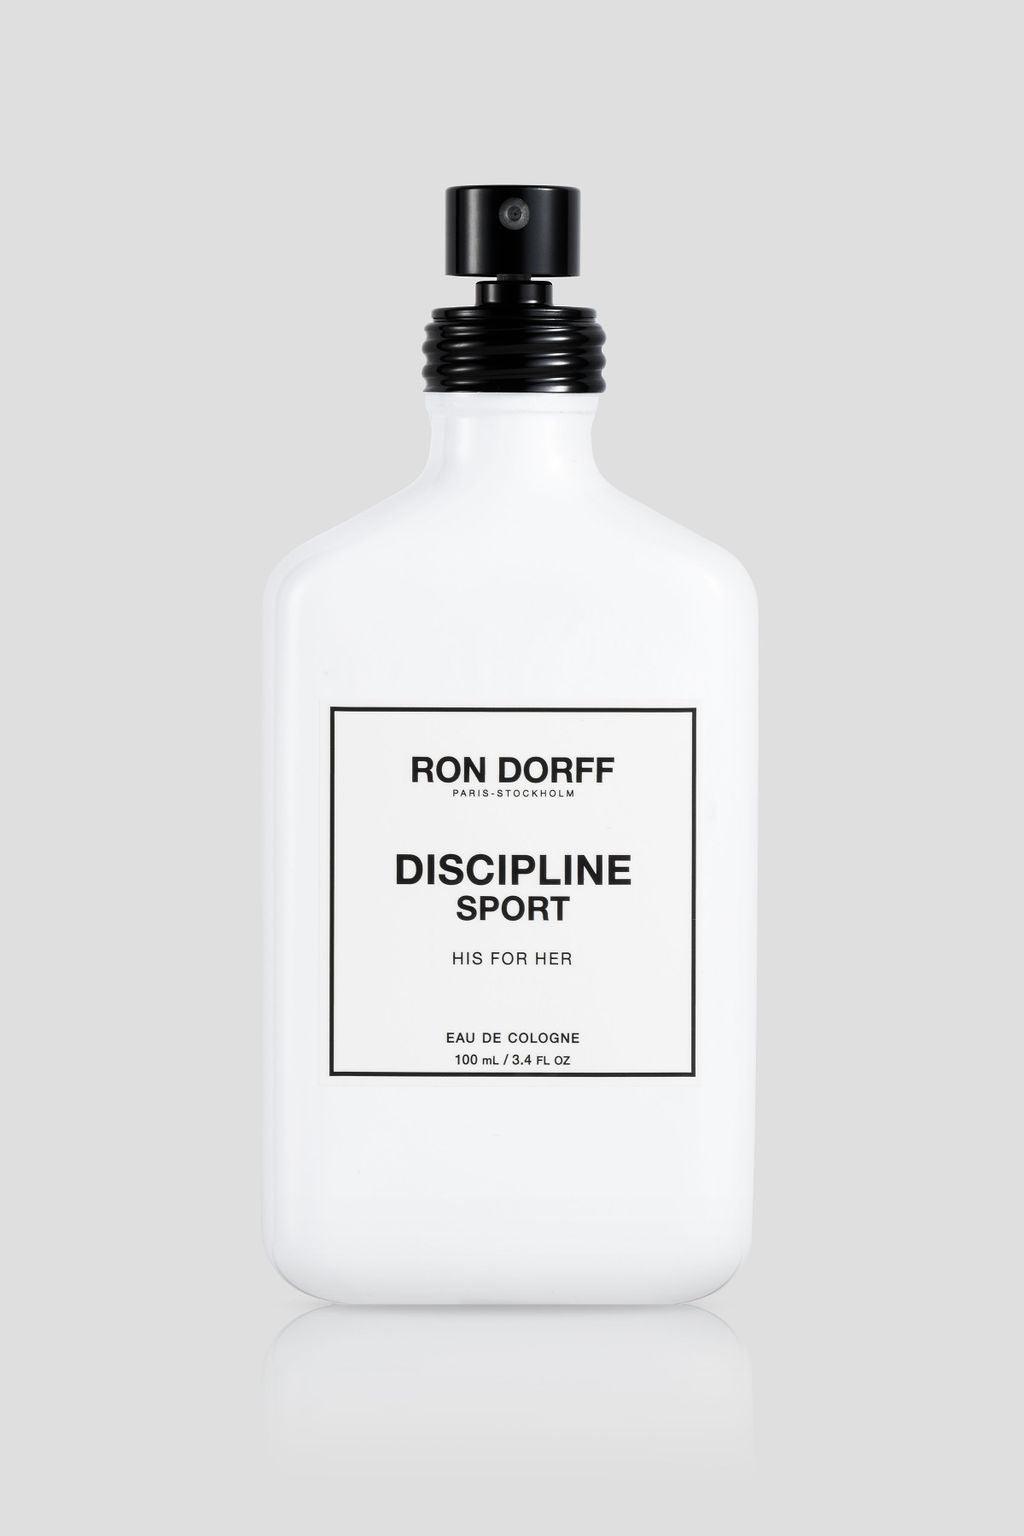 DISCIPLINE SPORT HIS FOR HER - SCENT BEAUTY